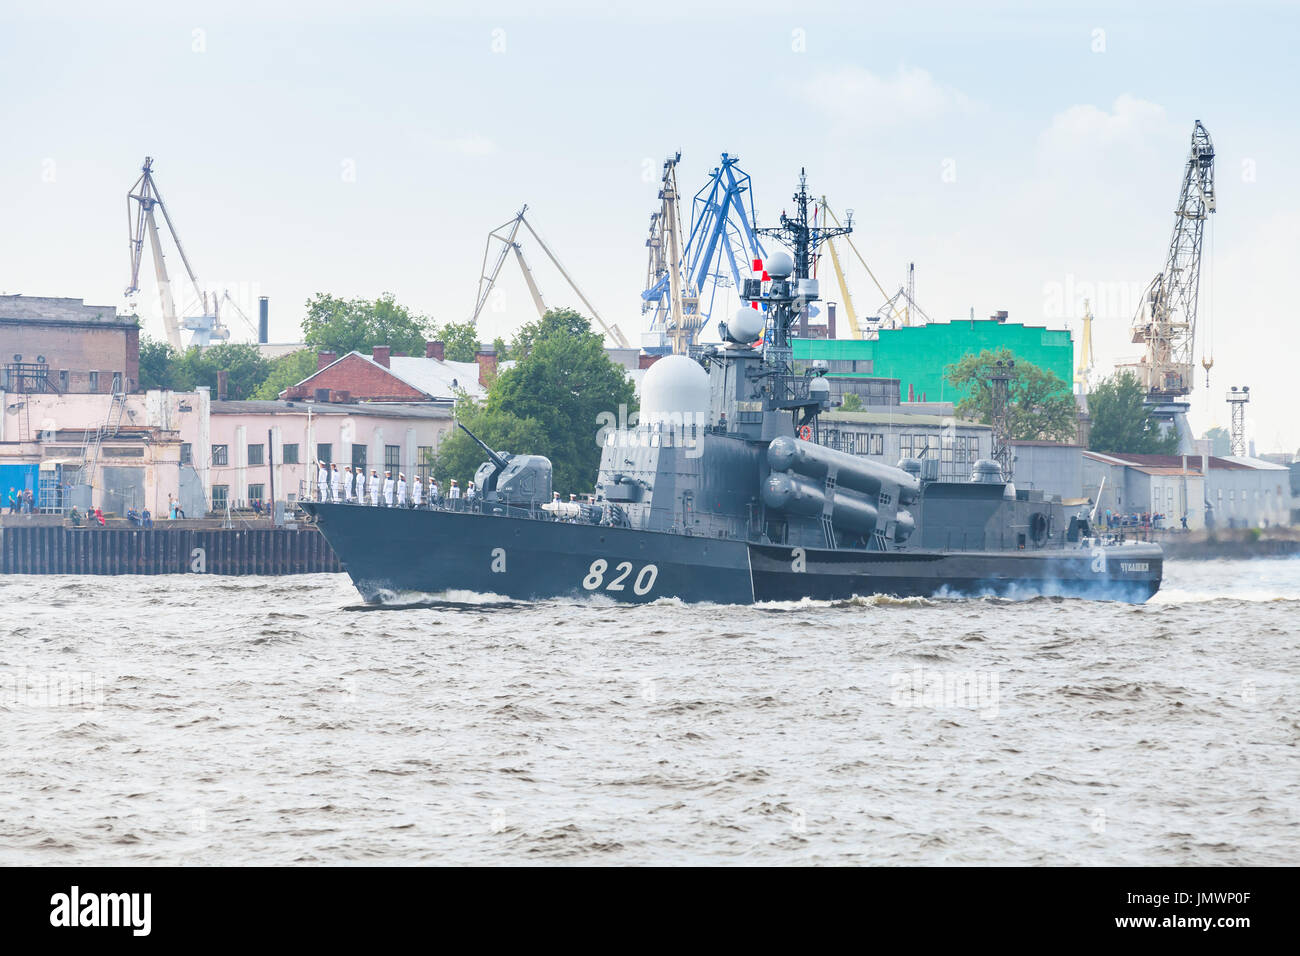 Saint-Petersburg, Russia - July 28, 2017: Warship on the Neva River. Rehearsal for the parade of Russian naval forces. Project 1241, class of Soviet m Stock Photo